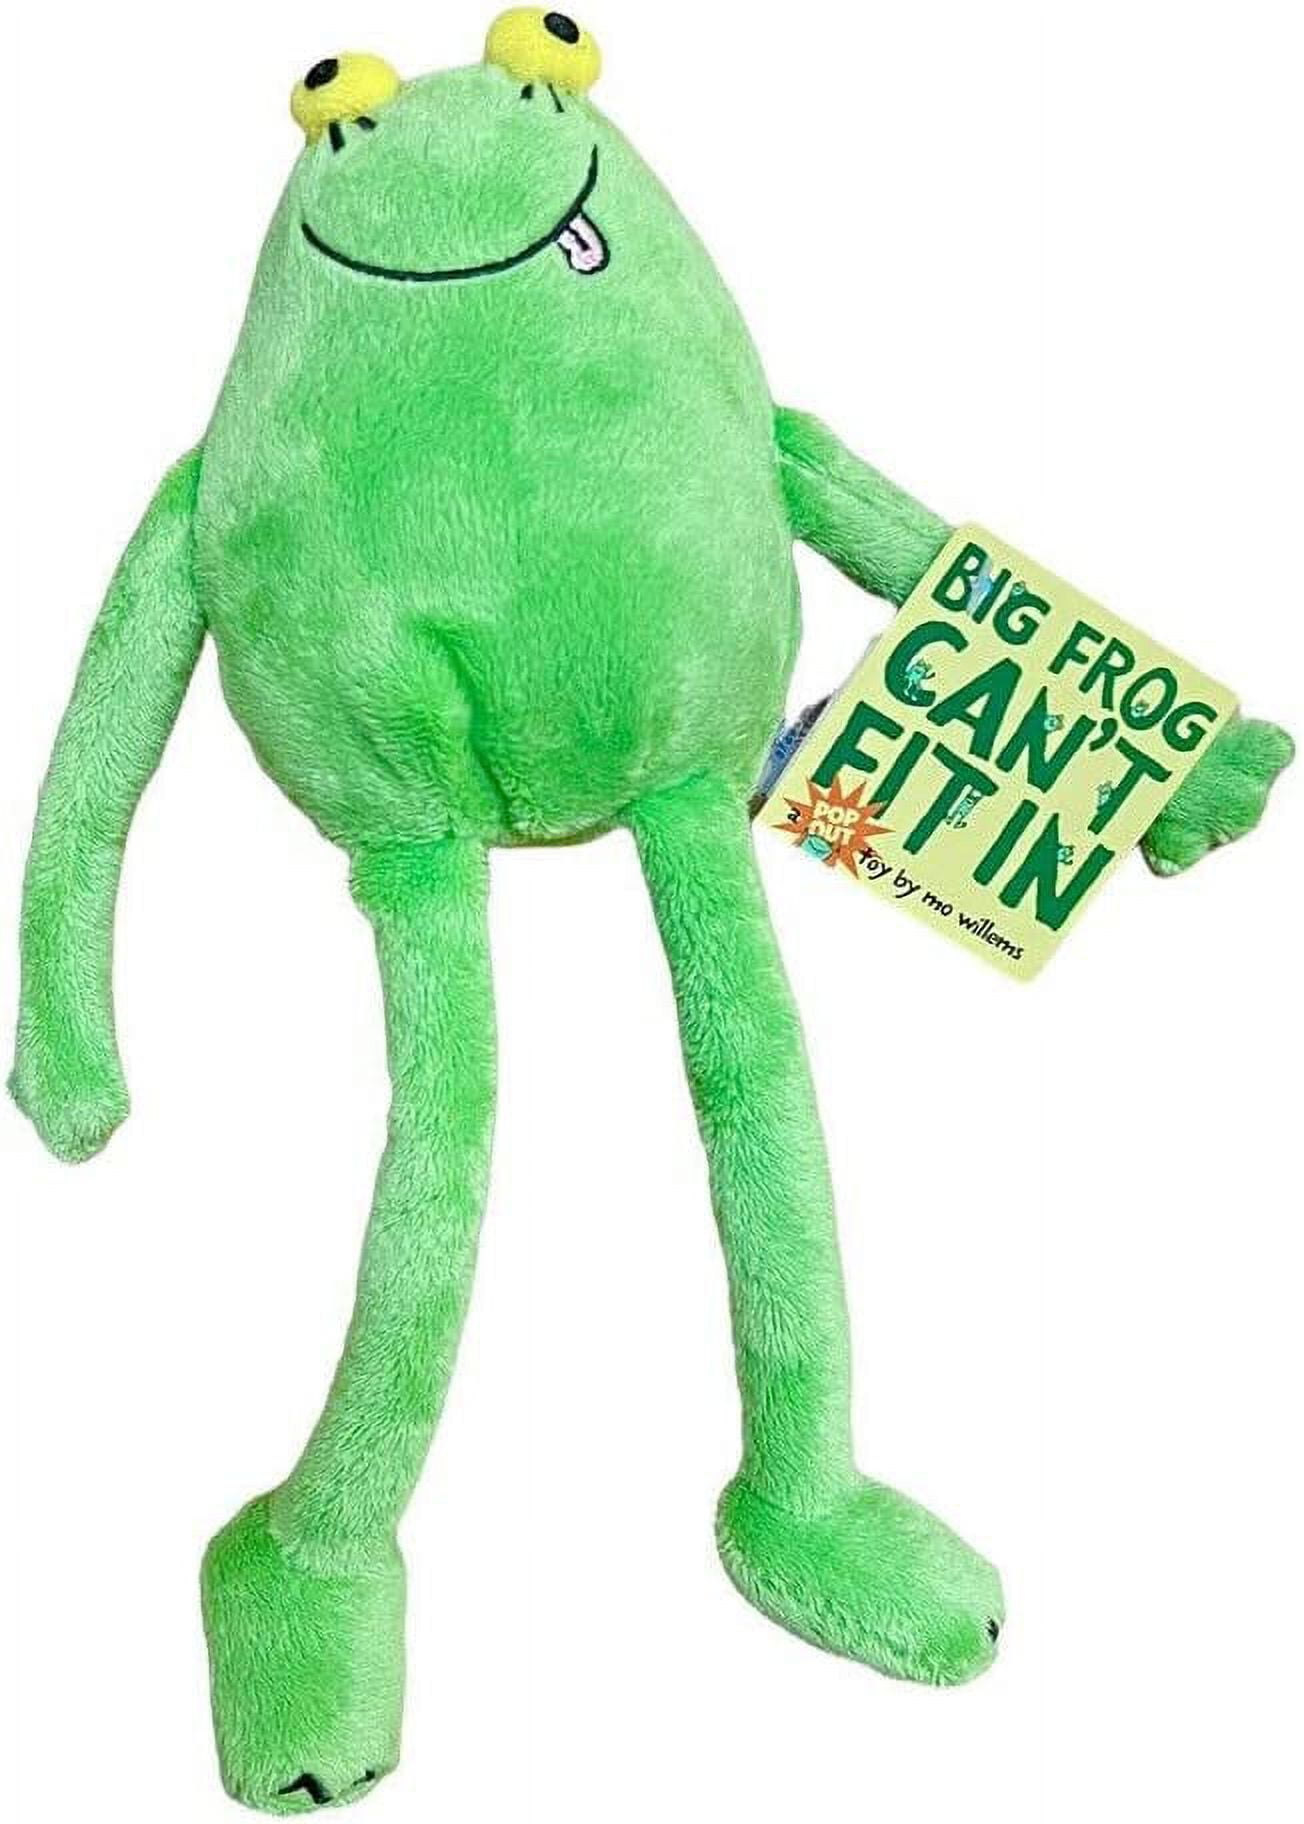 Big Frog Can't Fit in by Mo Willems 8” Plush Soft Stuffed Animal Rare New